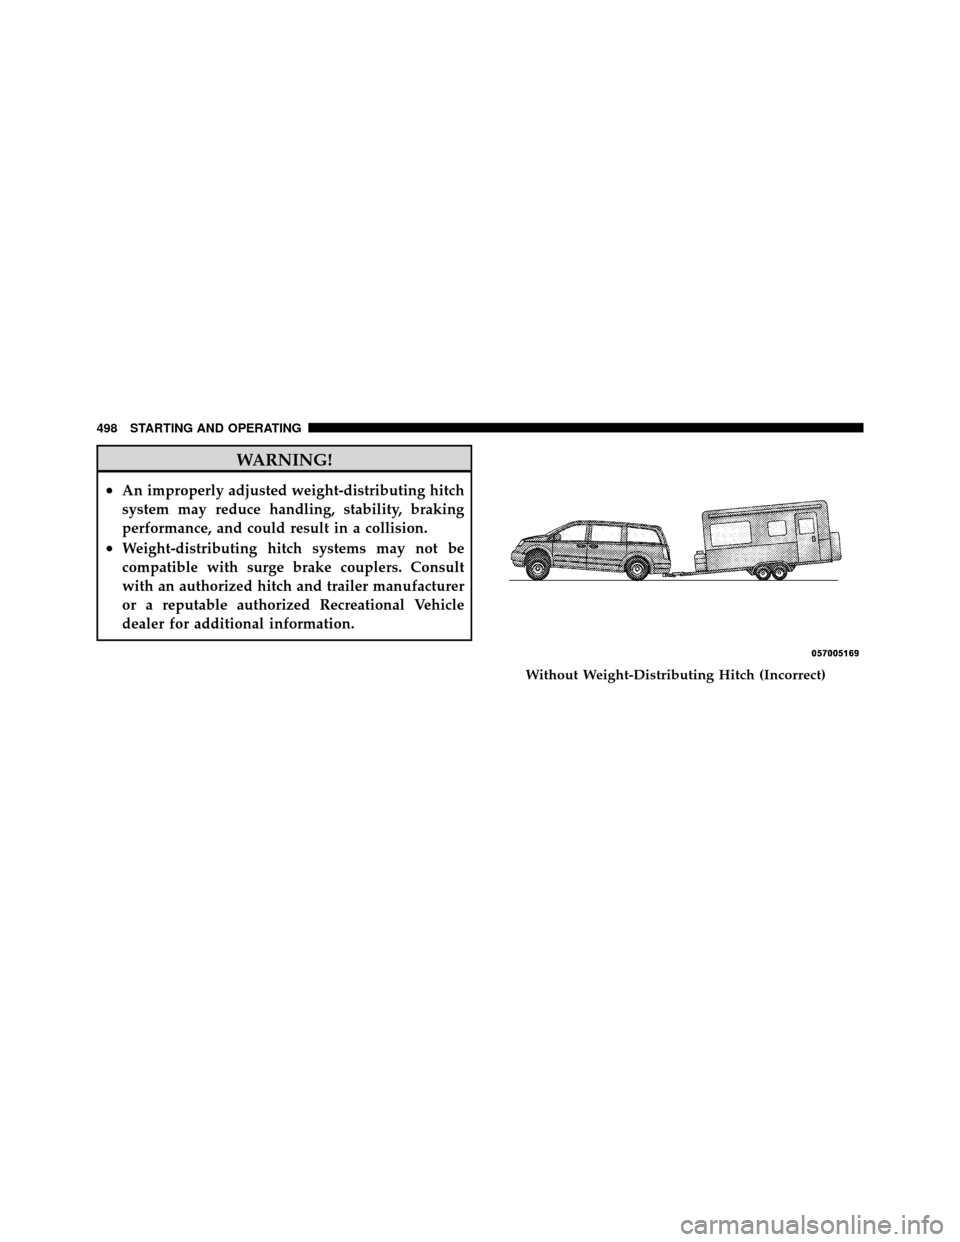 DODGE GRAND CARAVAN 2012 5.G Service Manual WARNING!
•An improperly adjusted weight-distributing hitch
system may reduce handling, stability, braking
performance, and could result in a collision.
•Weight-distributing hitch systems may not b